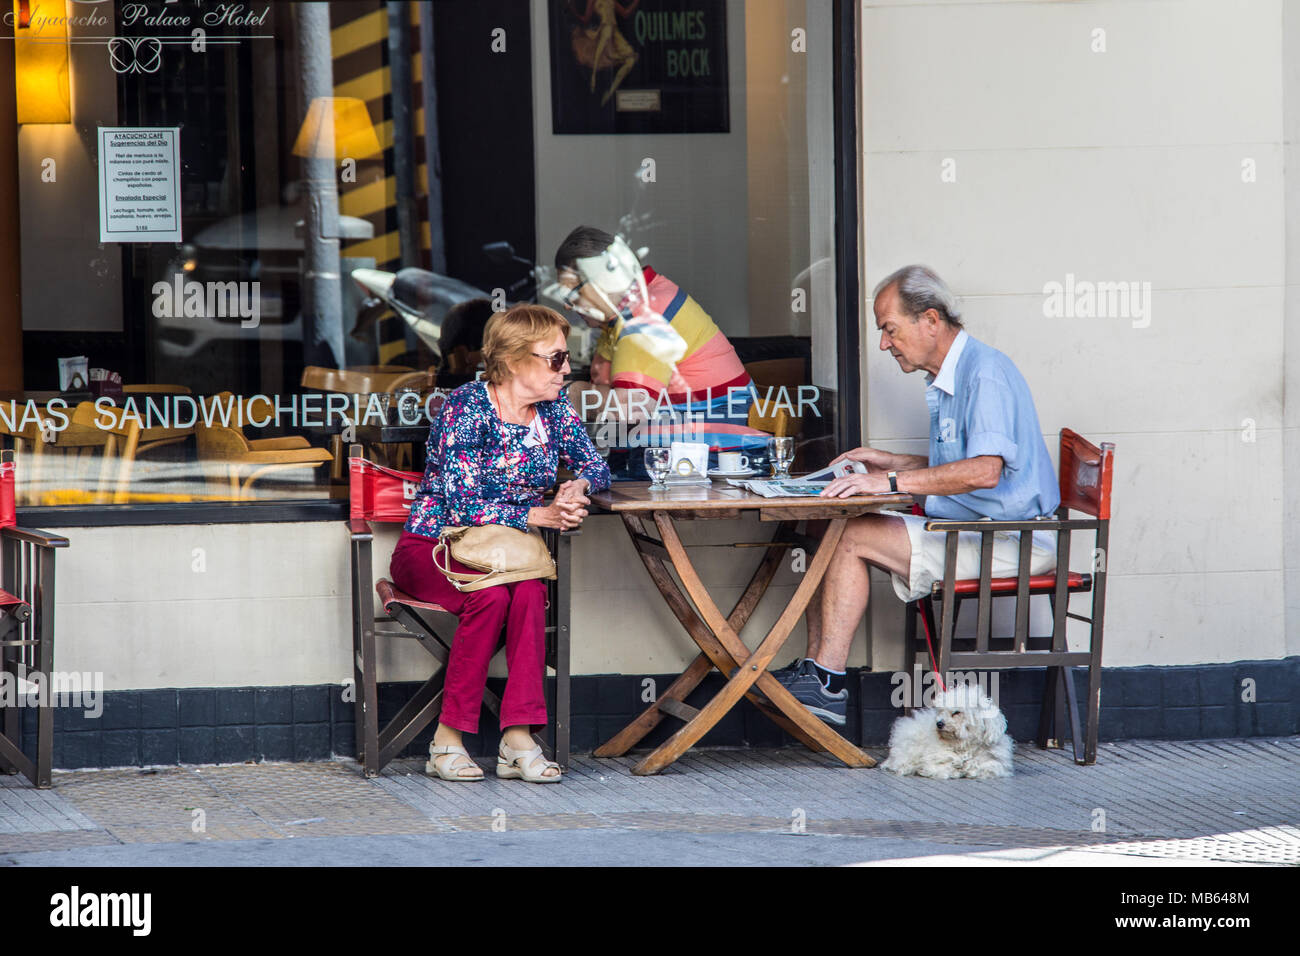 Argentine couple at a cafe, Buenos Aires, Argentina Stock Photo